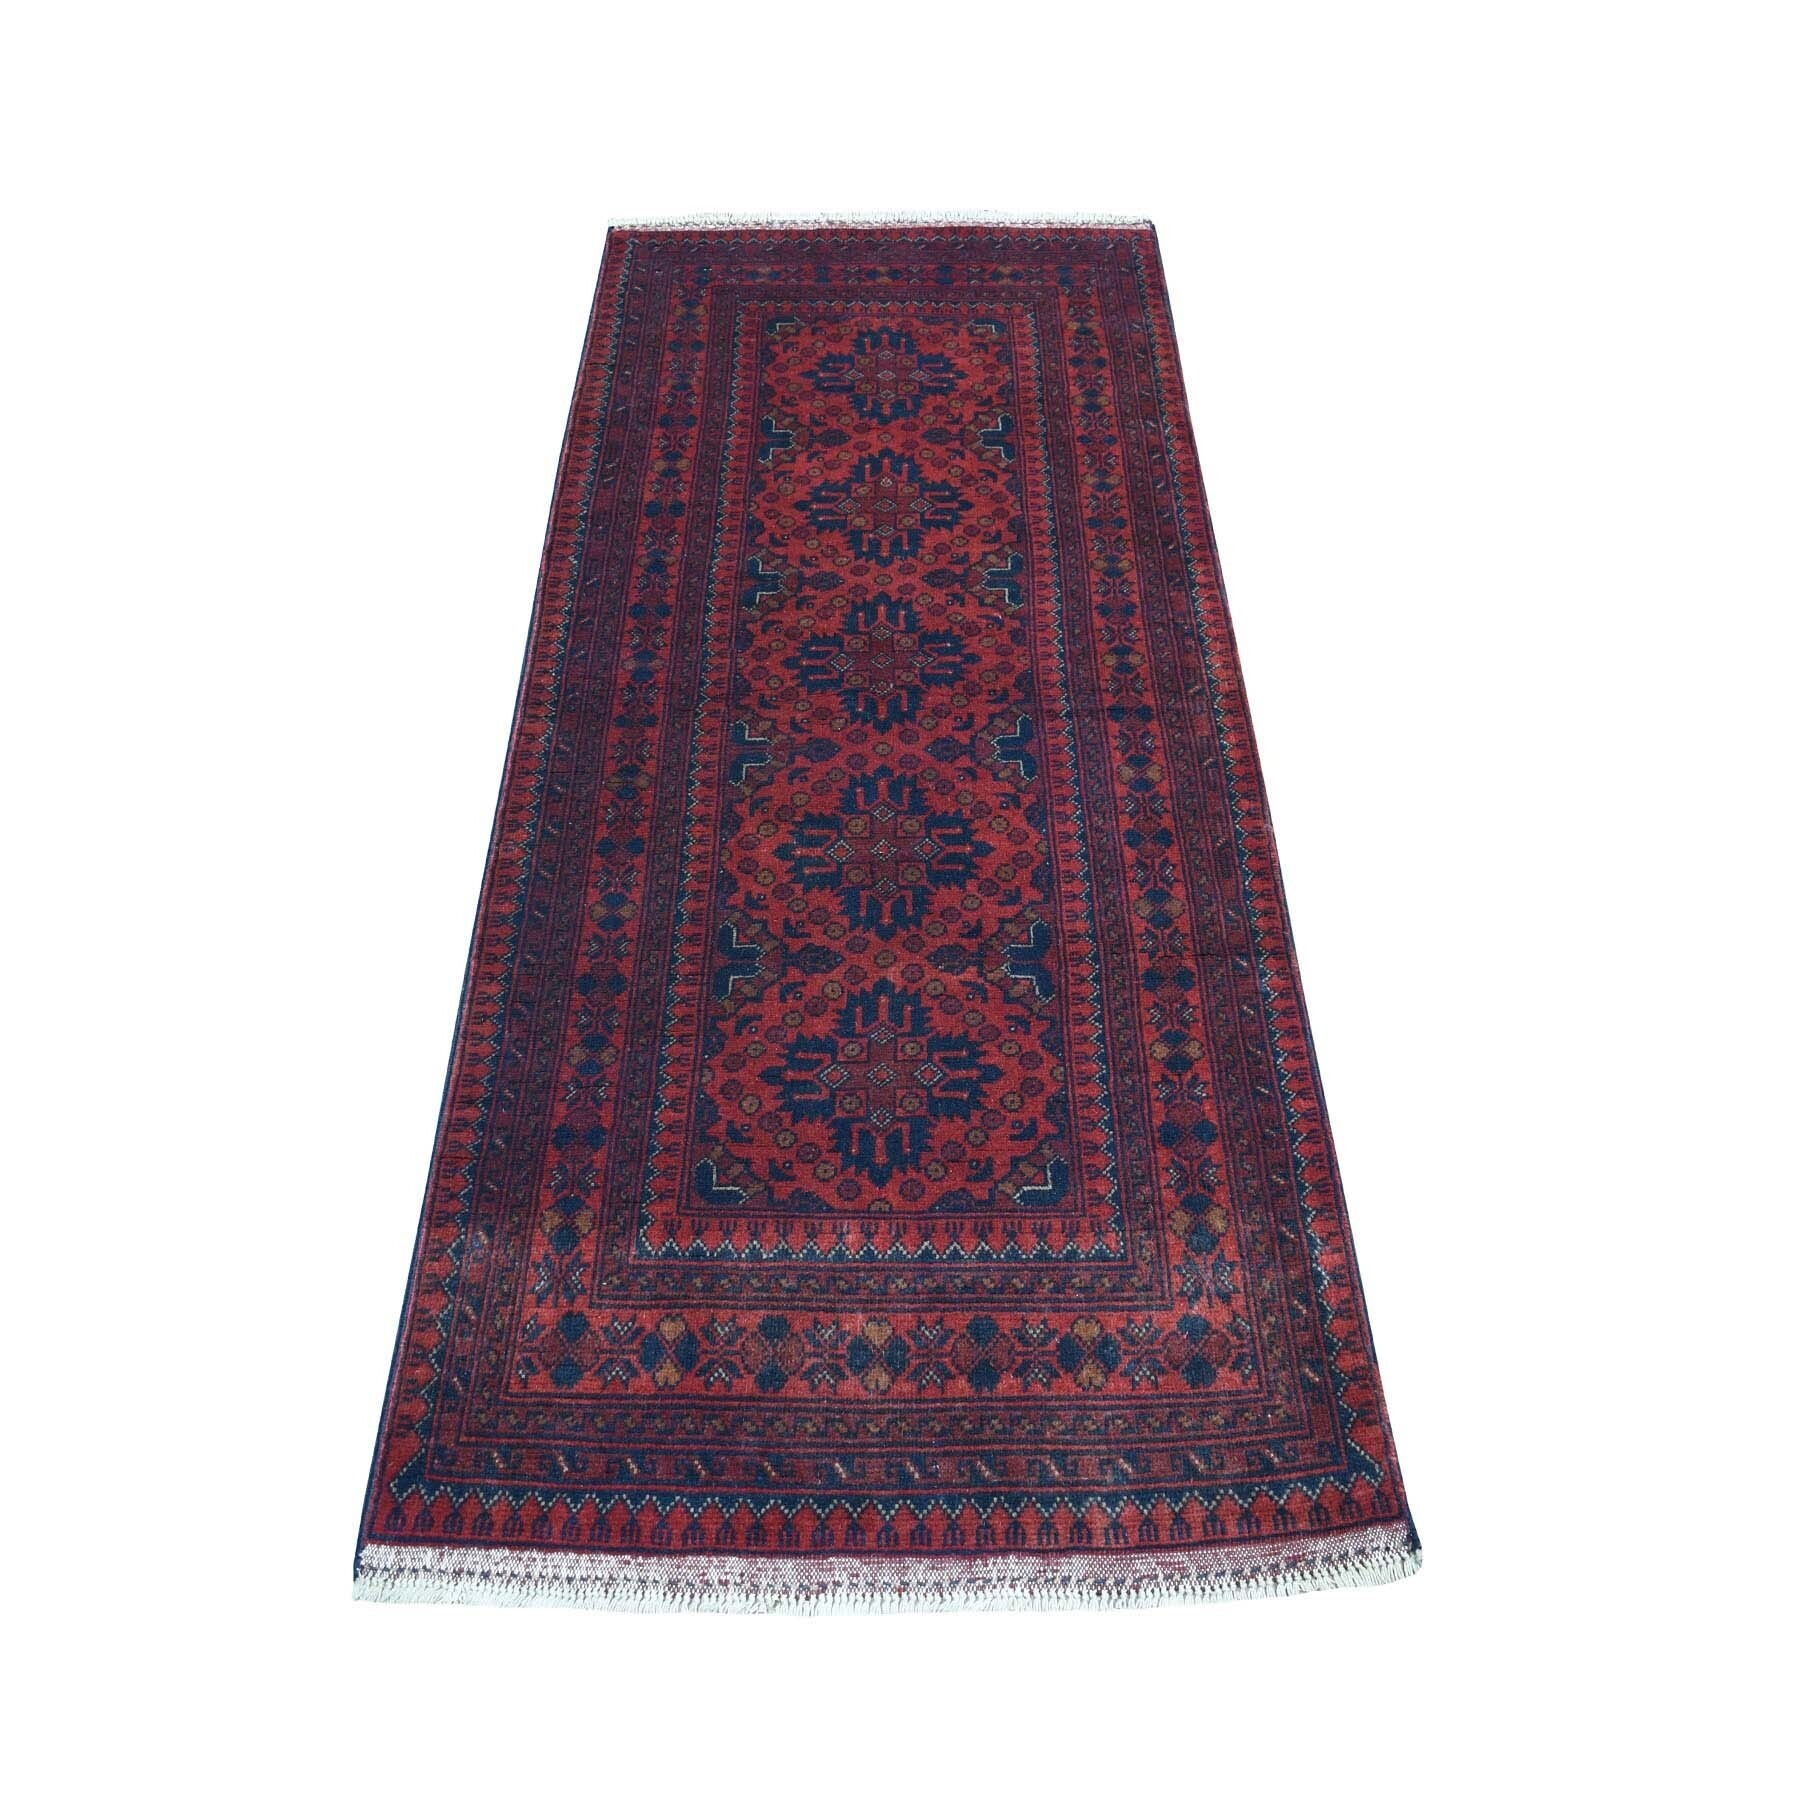 2'8"X6'1" Deep And Saturated Red Geometric Afghan Andkhoy Runner Pure Wool Hand Knotted Oriental Rug moaeceed